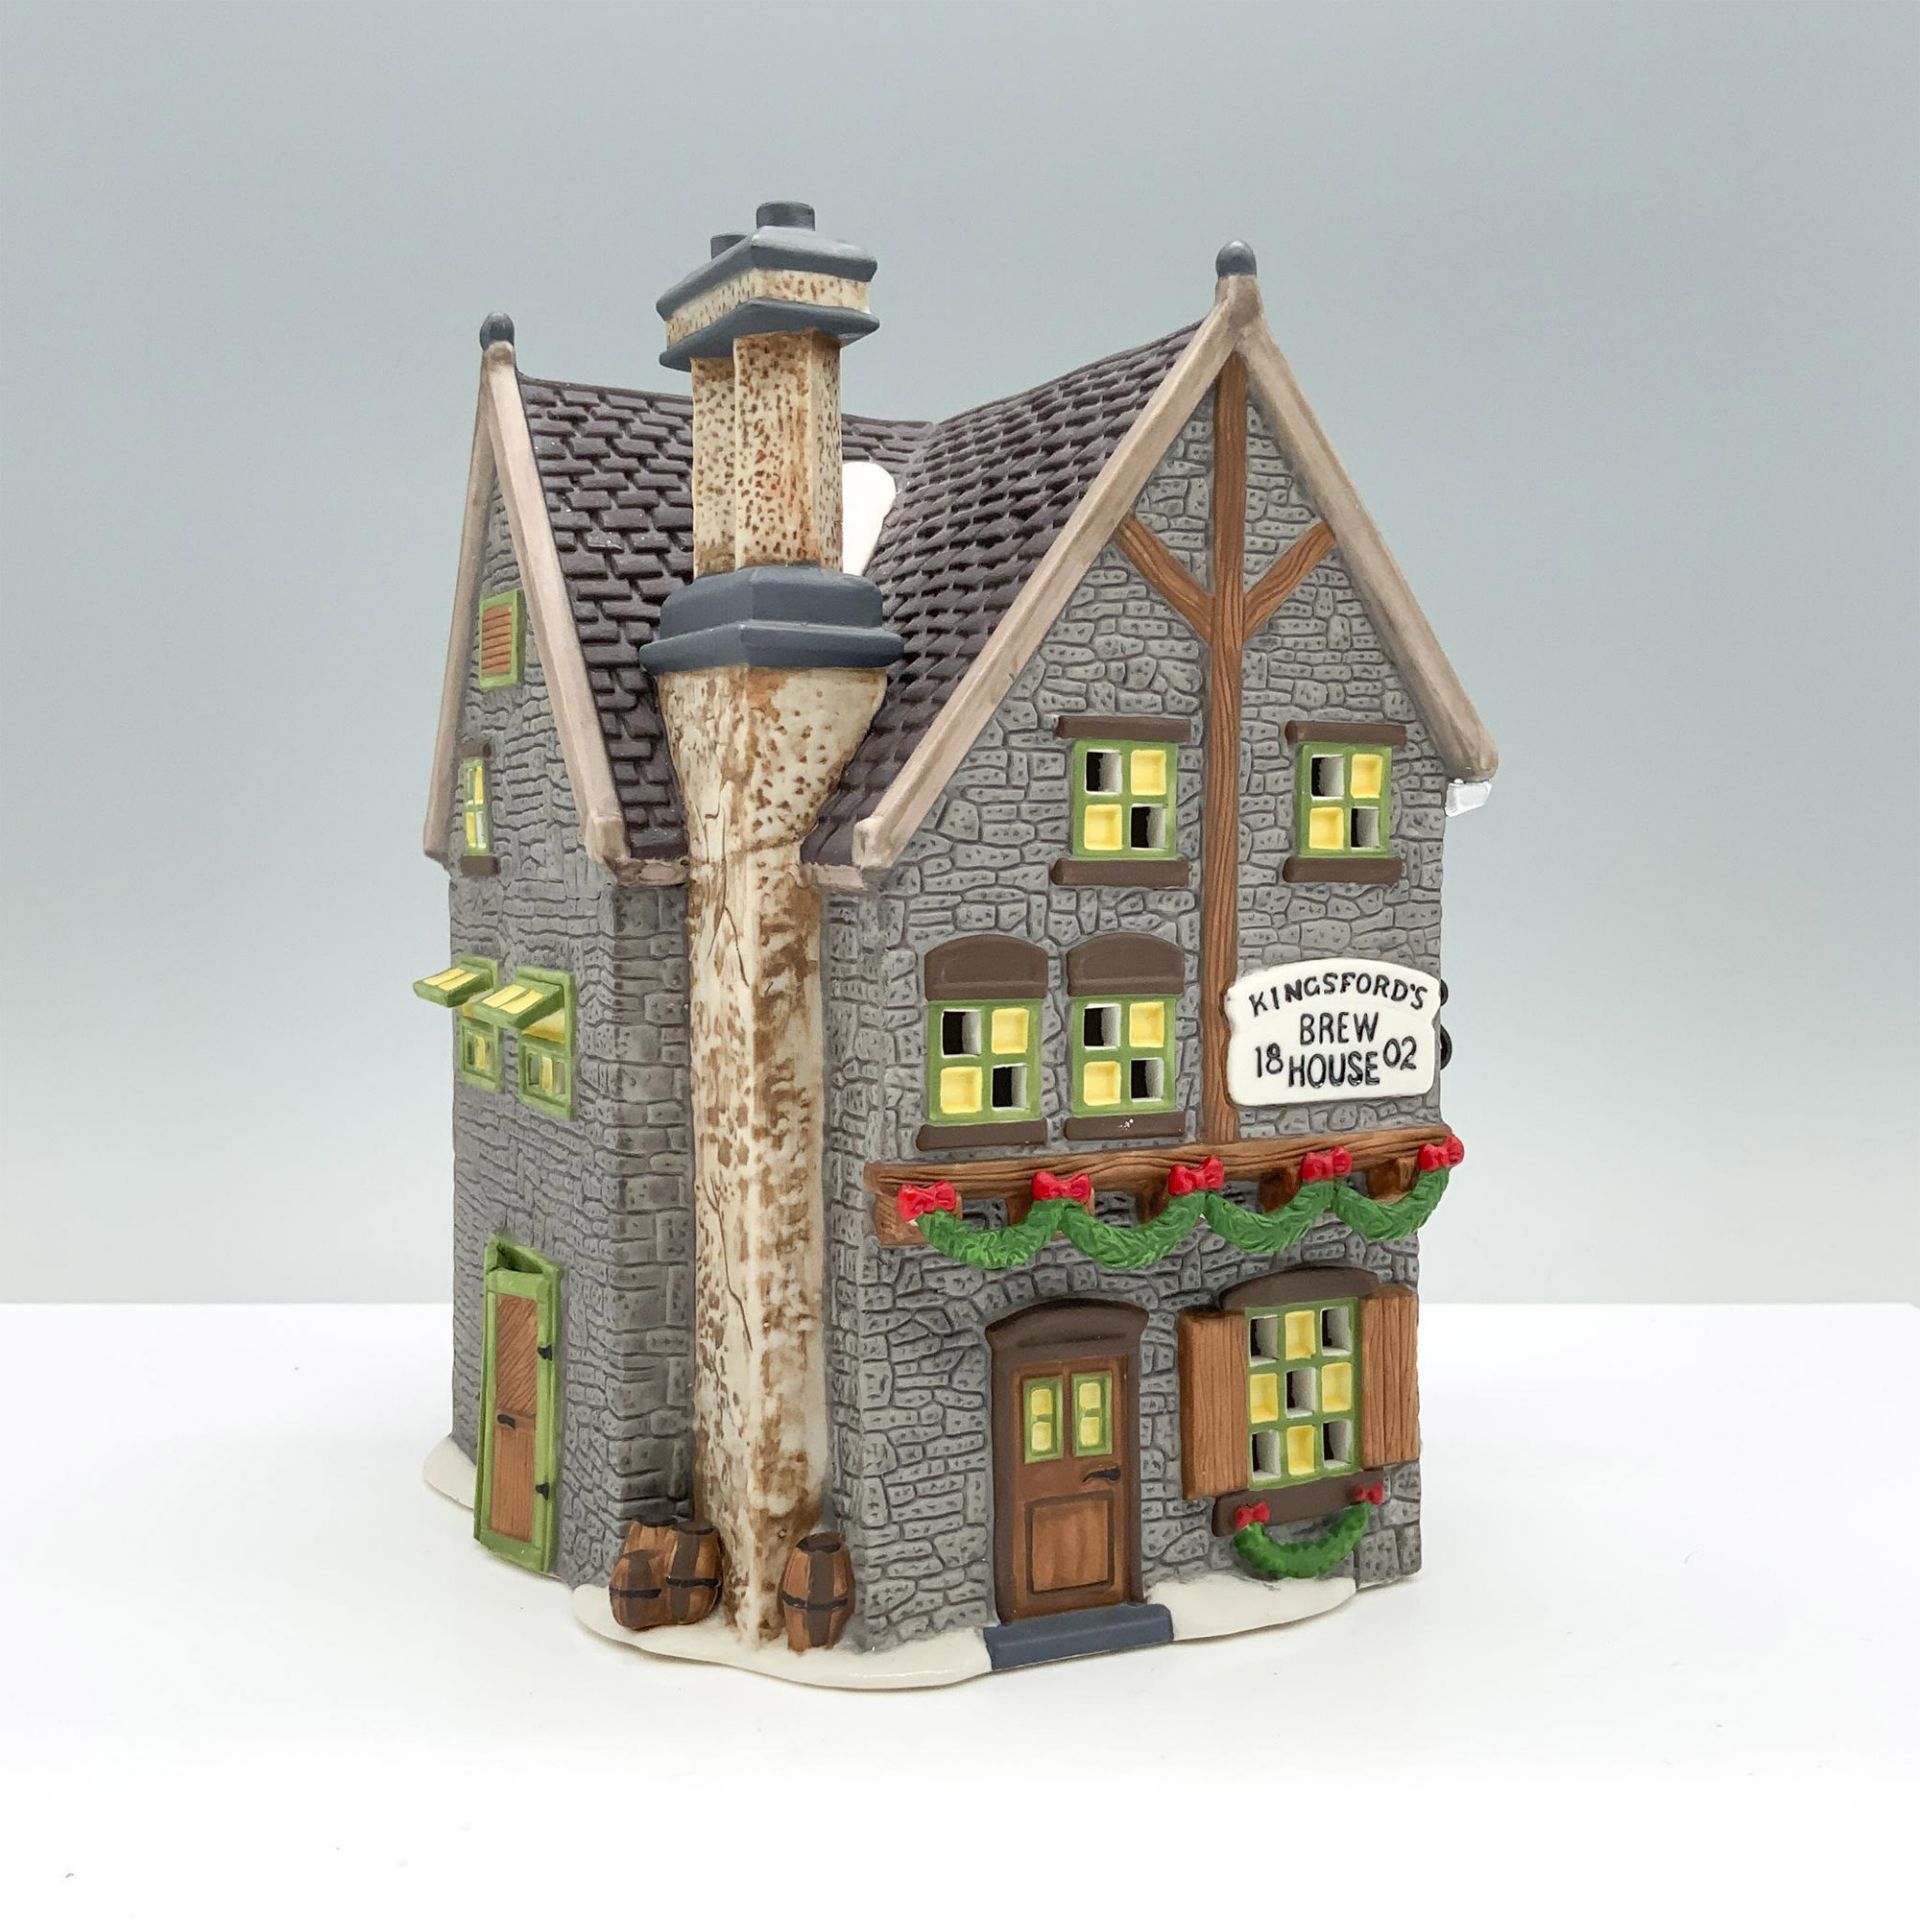 Department 56 Dickens Village Figurine, Kingsford Brew House